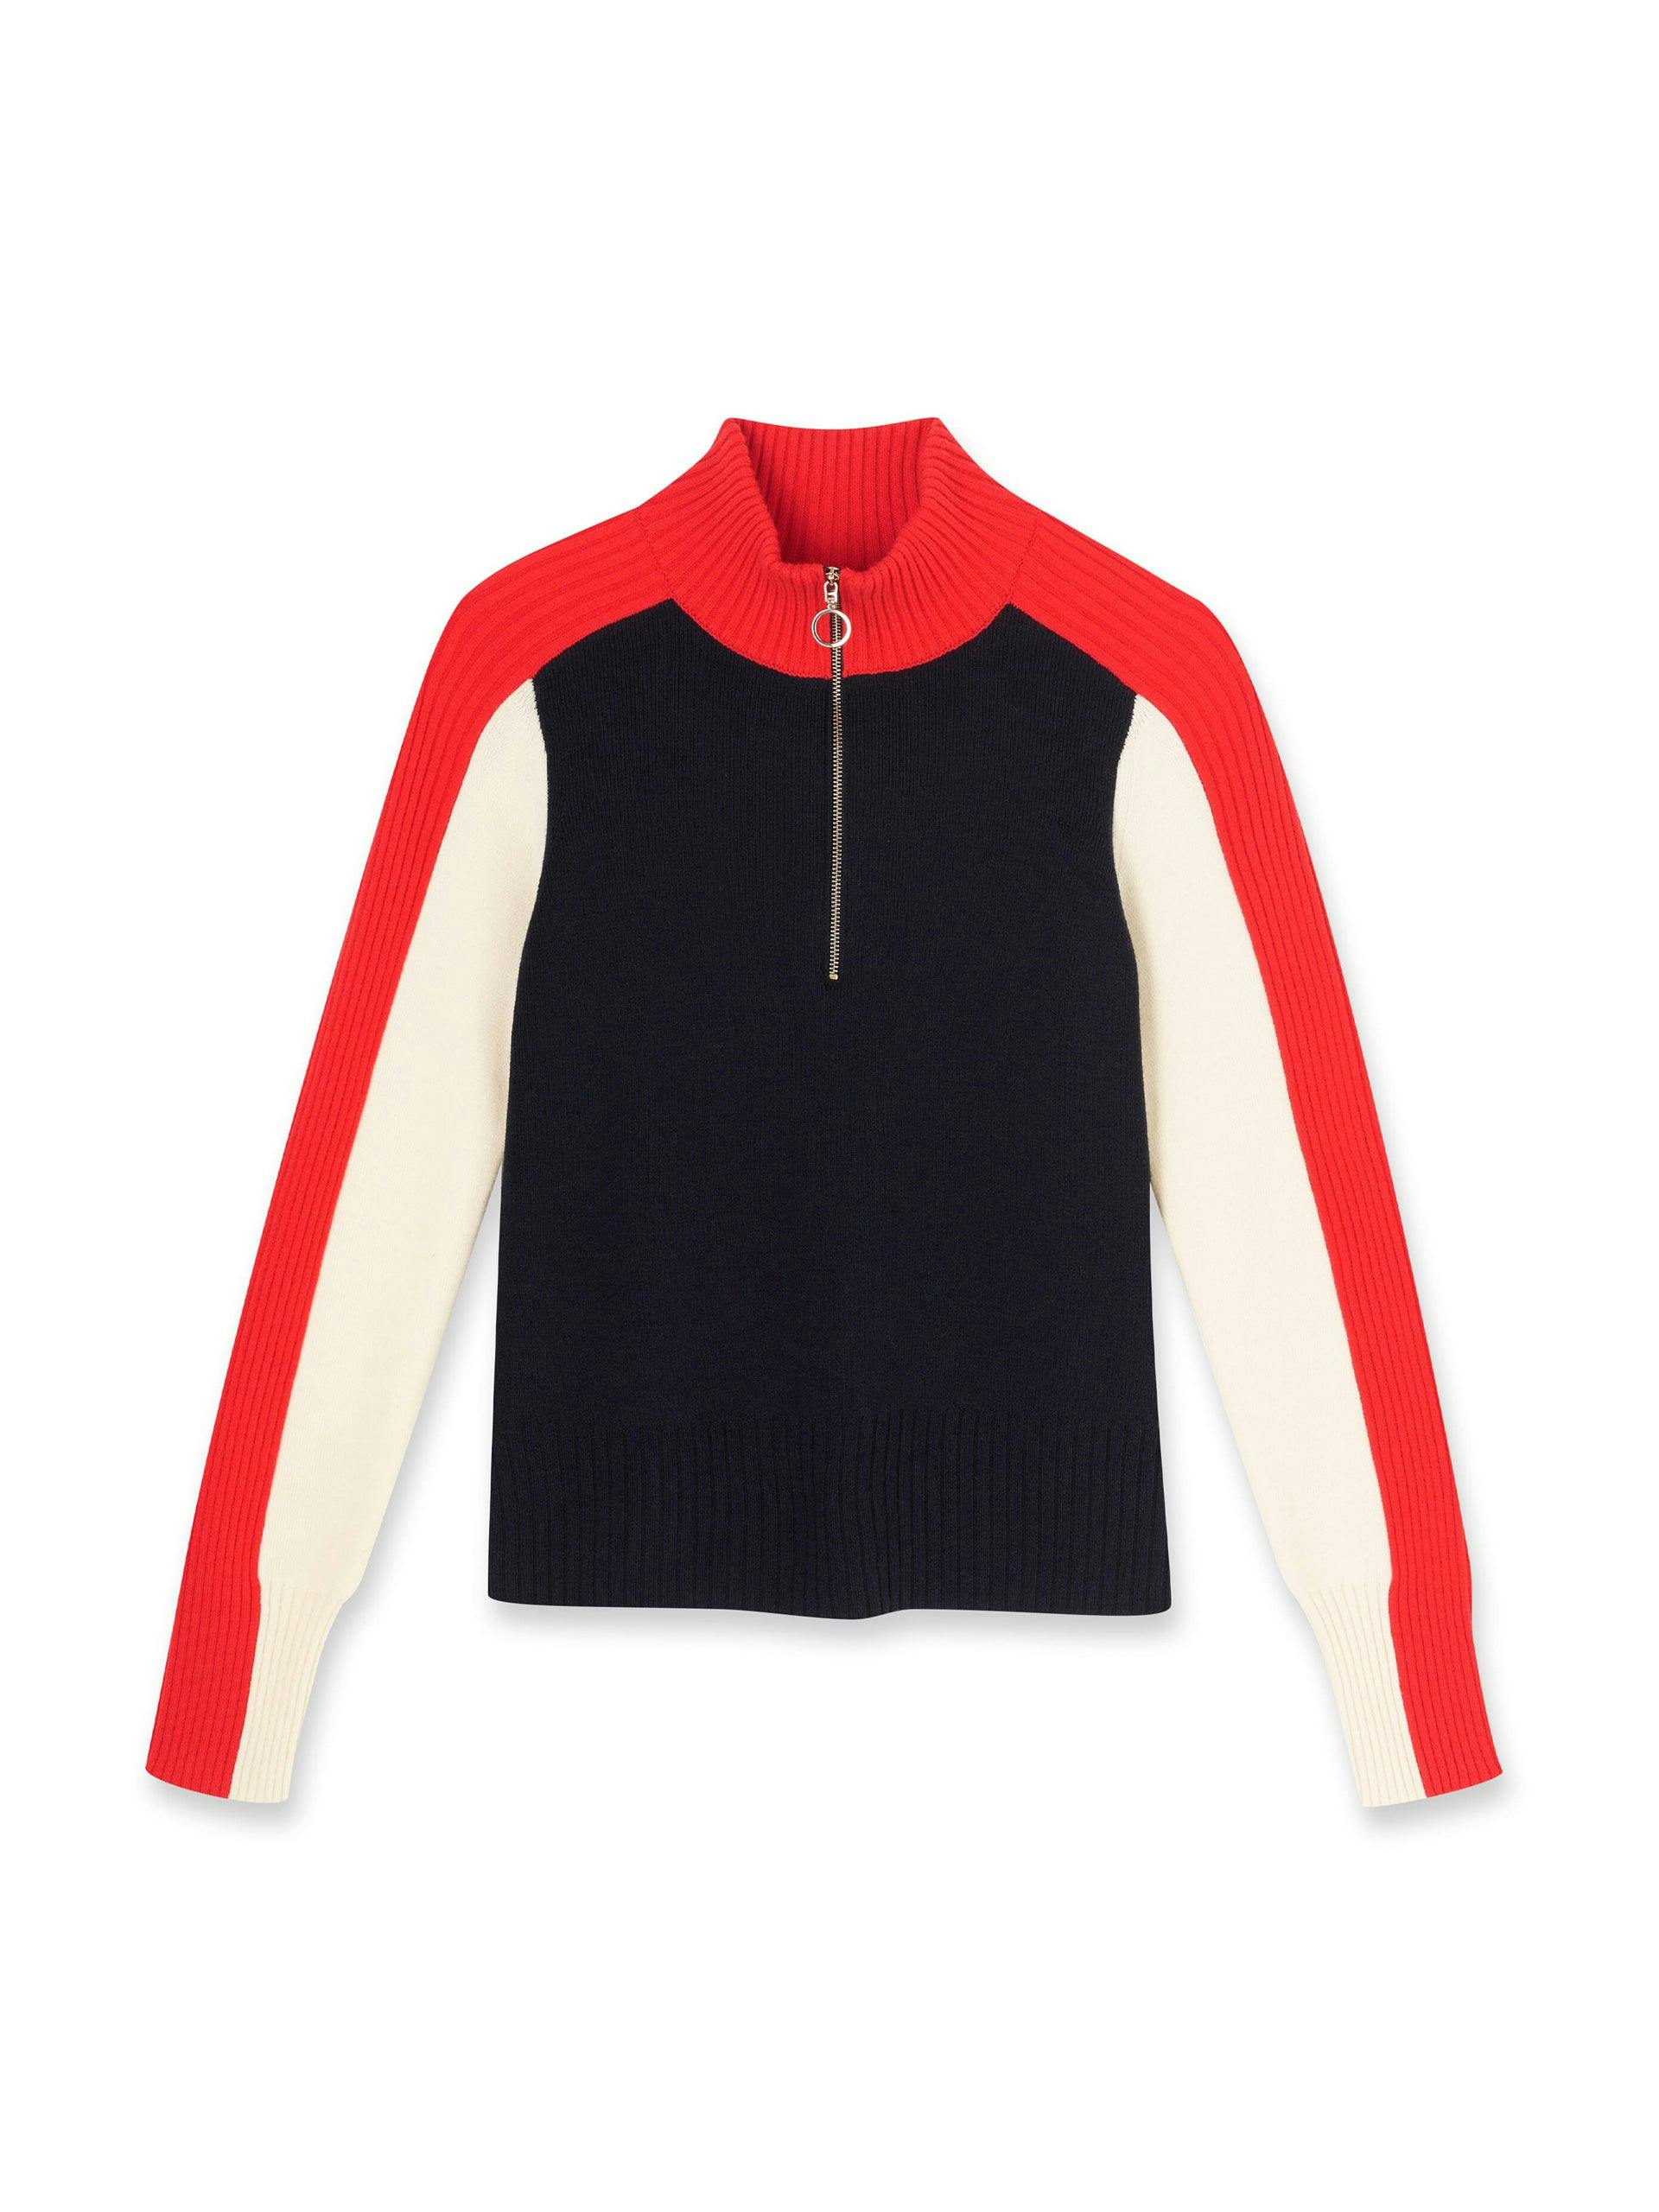 Navy, white and red zip up jumper